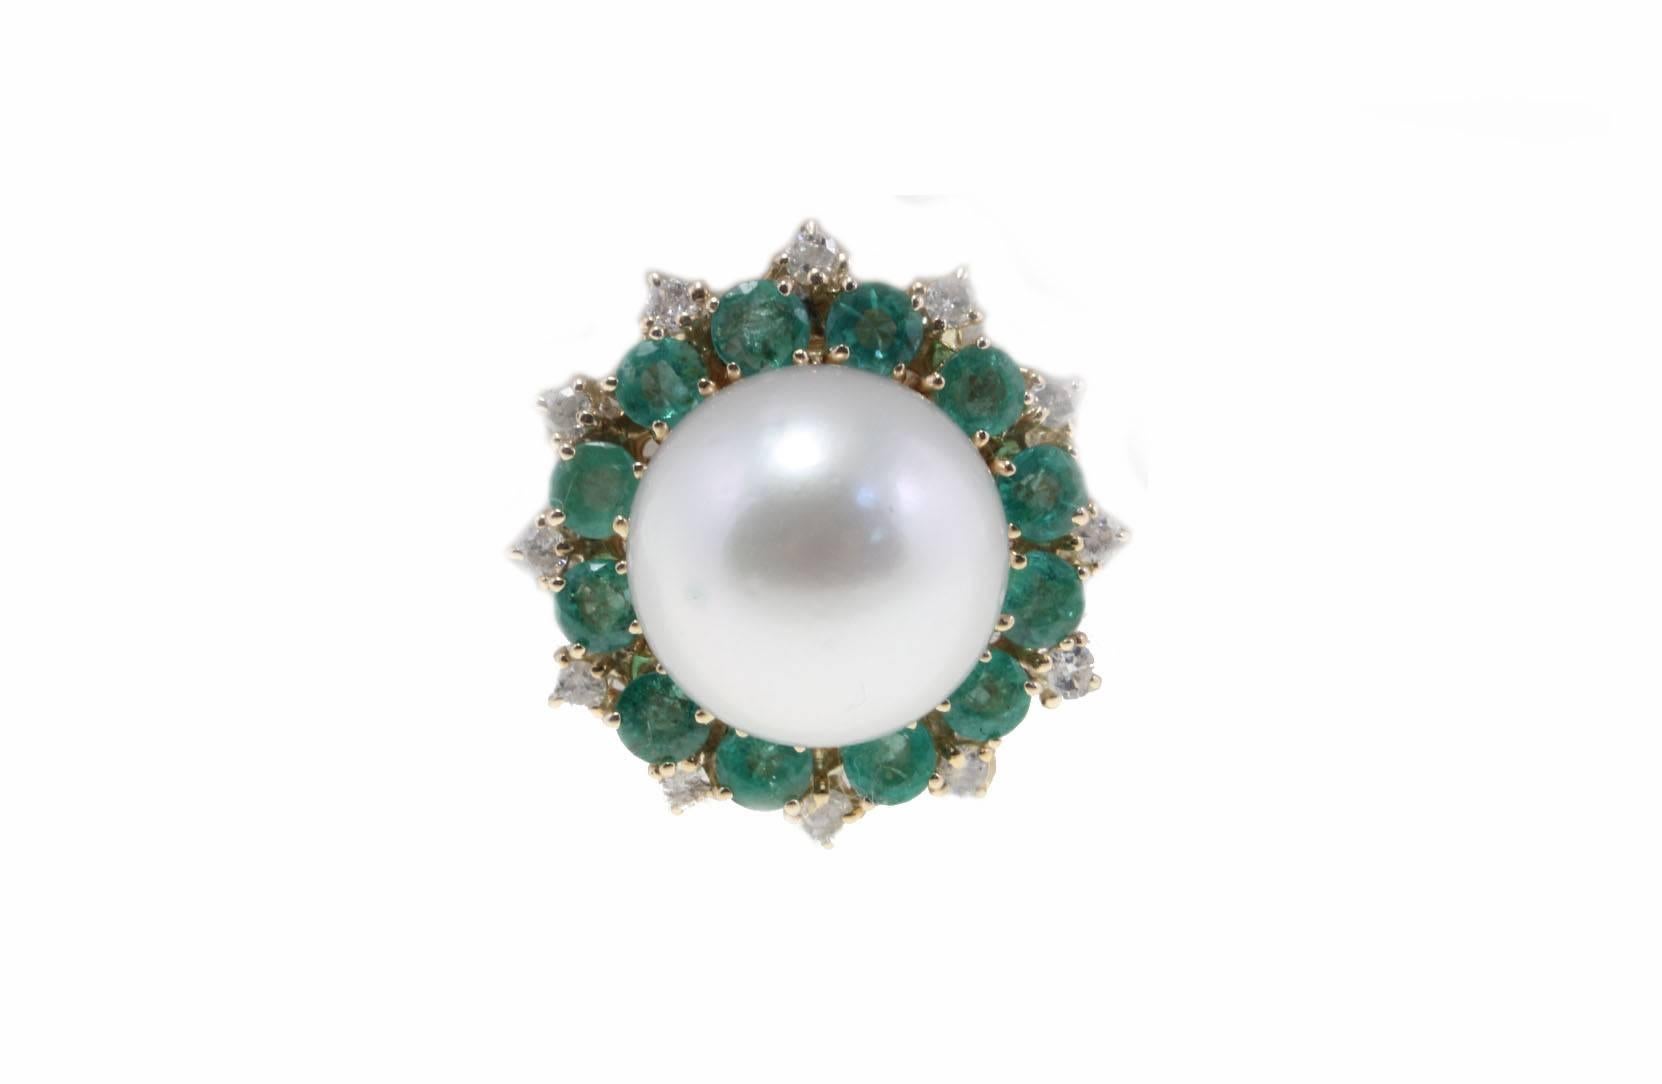 These charming earrings are simply composed of a crown of diamonds  and emeralds that surrounding a natural large sea south pearl, all is mounted in 14Kt yellow gold.

Tot weight 21.2 gr both, single one 10.6 gr.
Diamonds 0.80 Kt
Emeralds 4.67